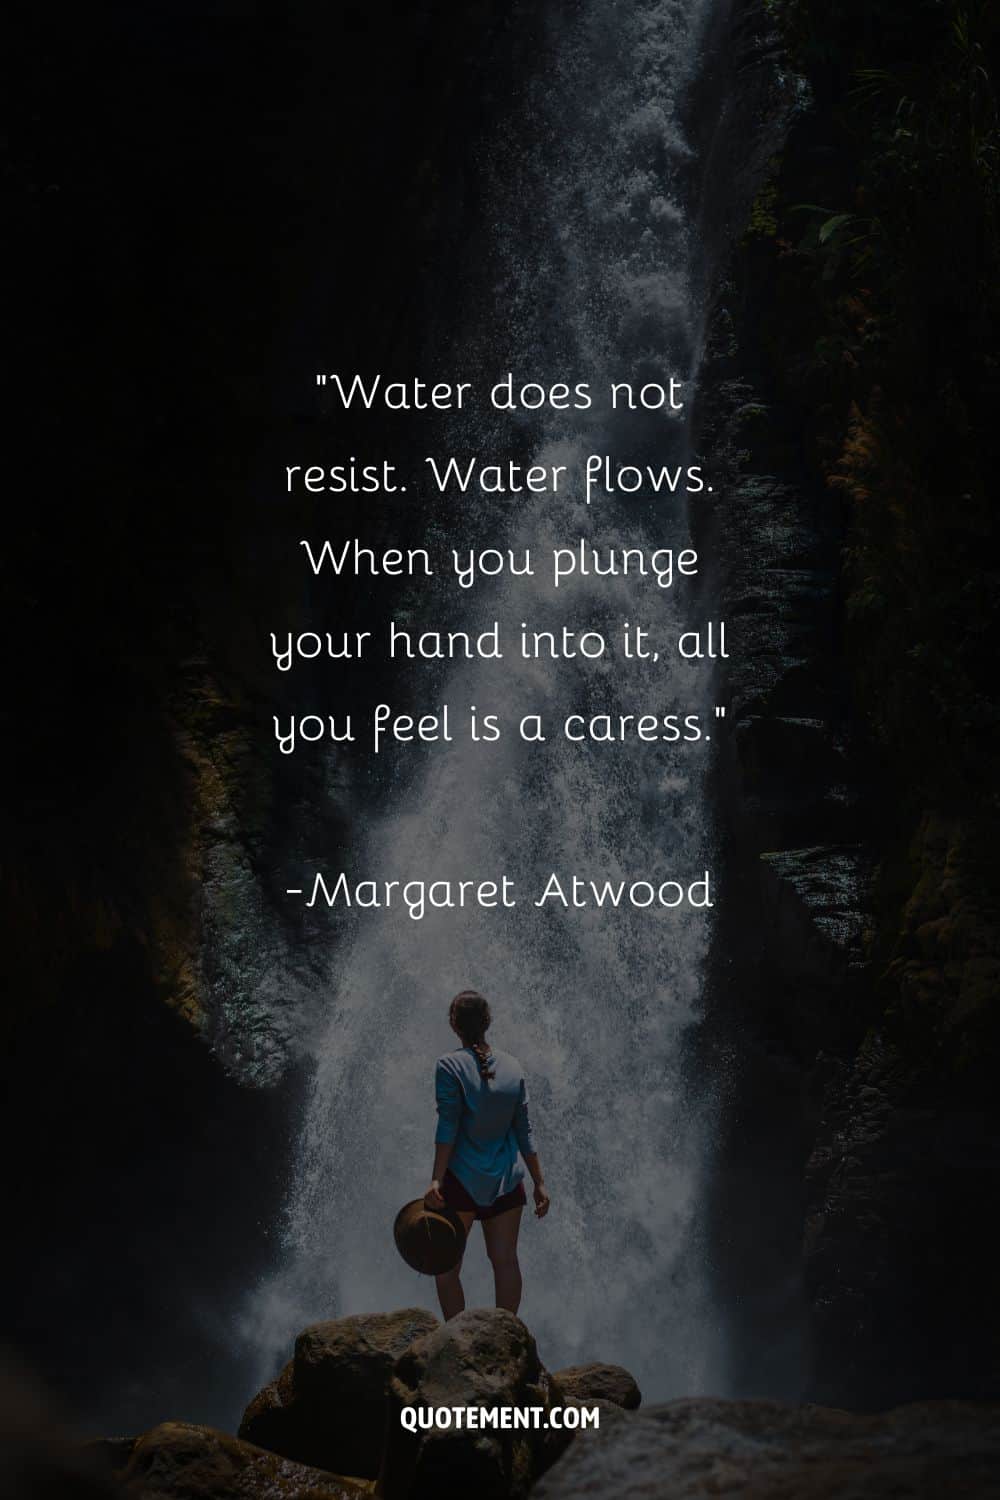 Margaret Atwood on water and a woman by the waterfall in the background as well
